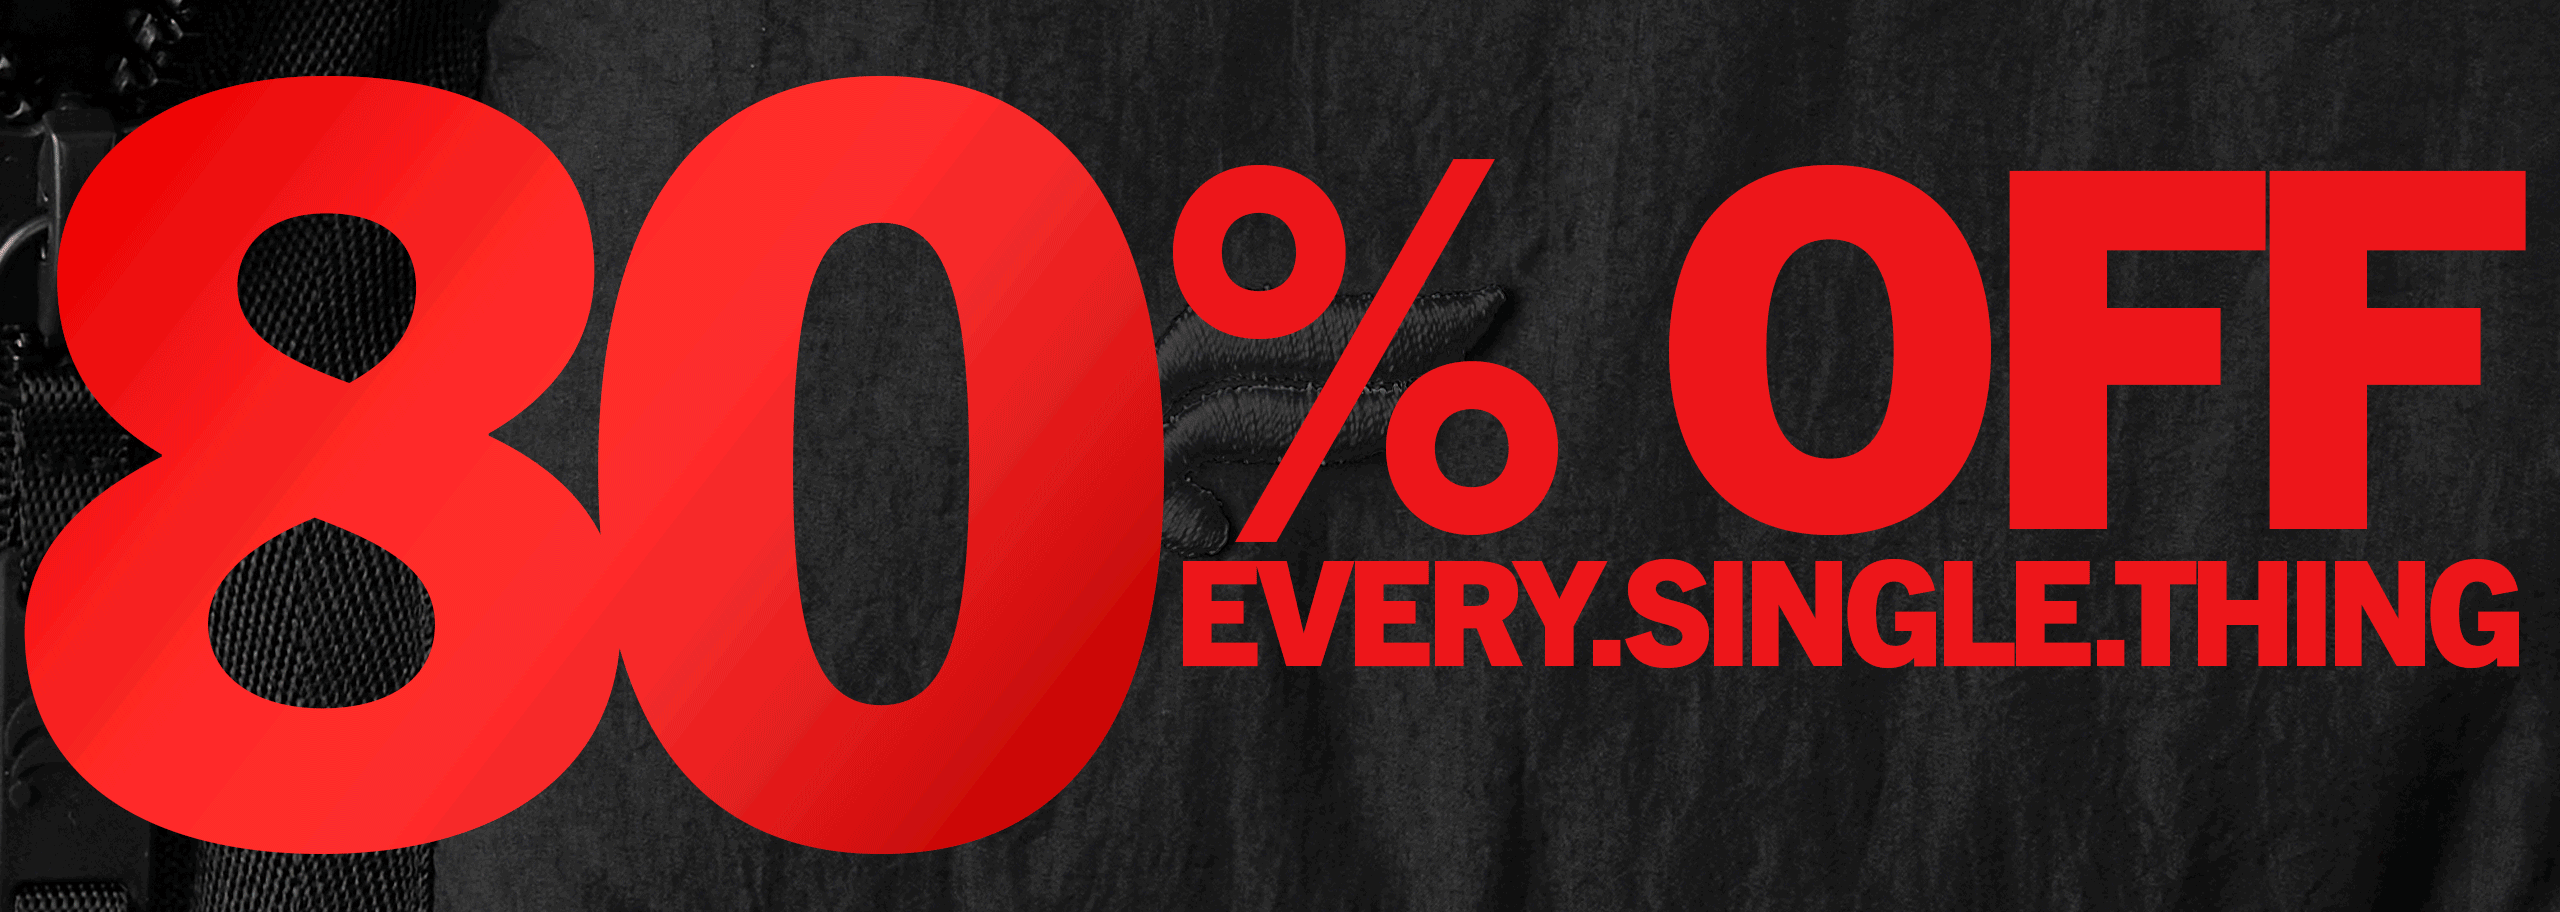 New VIP Offer: 80% off everything